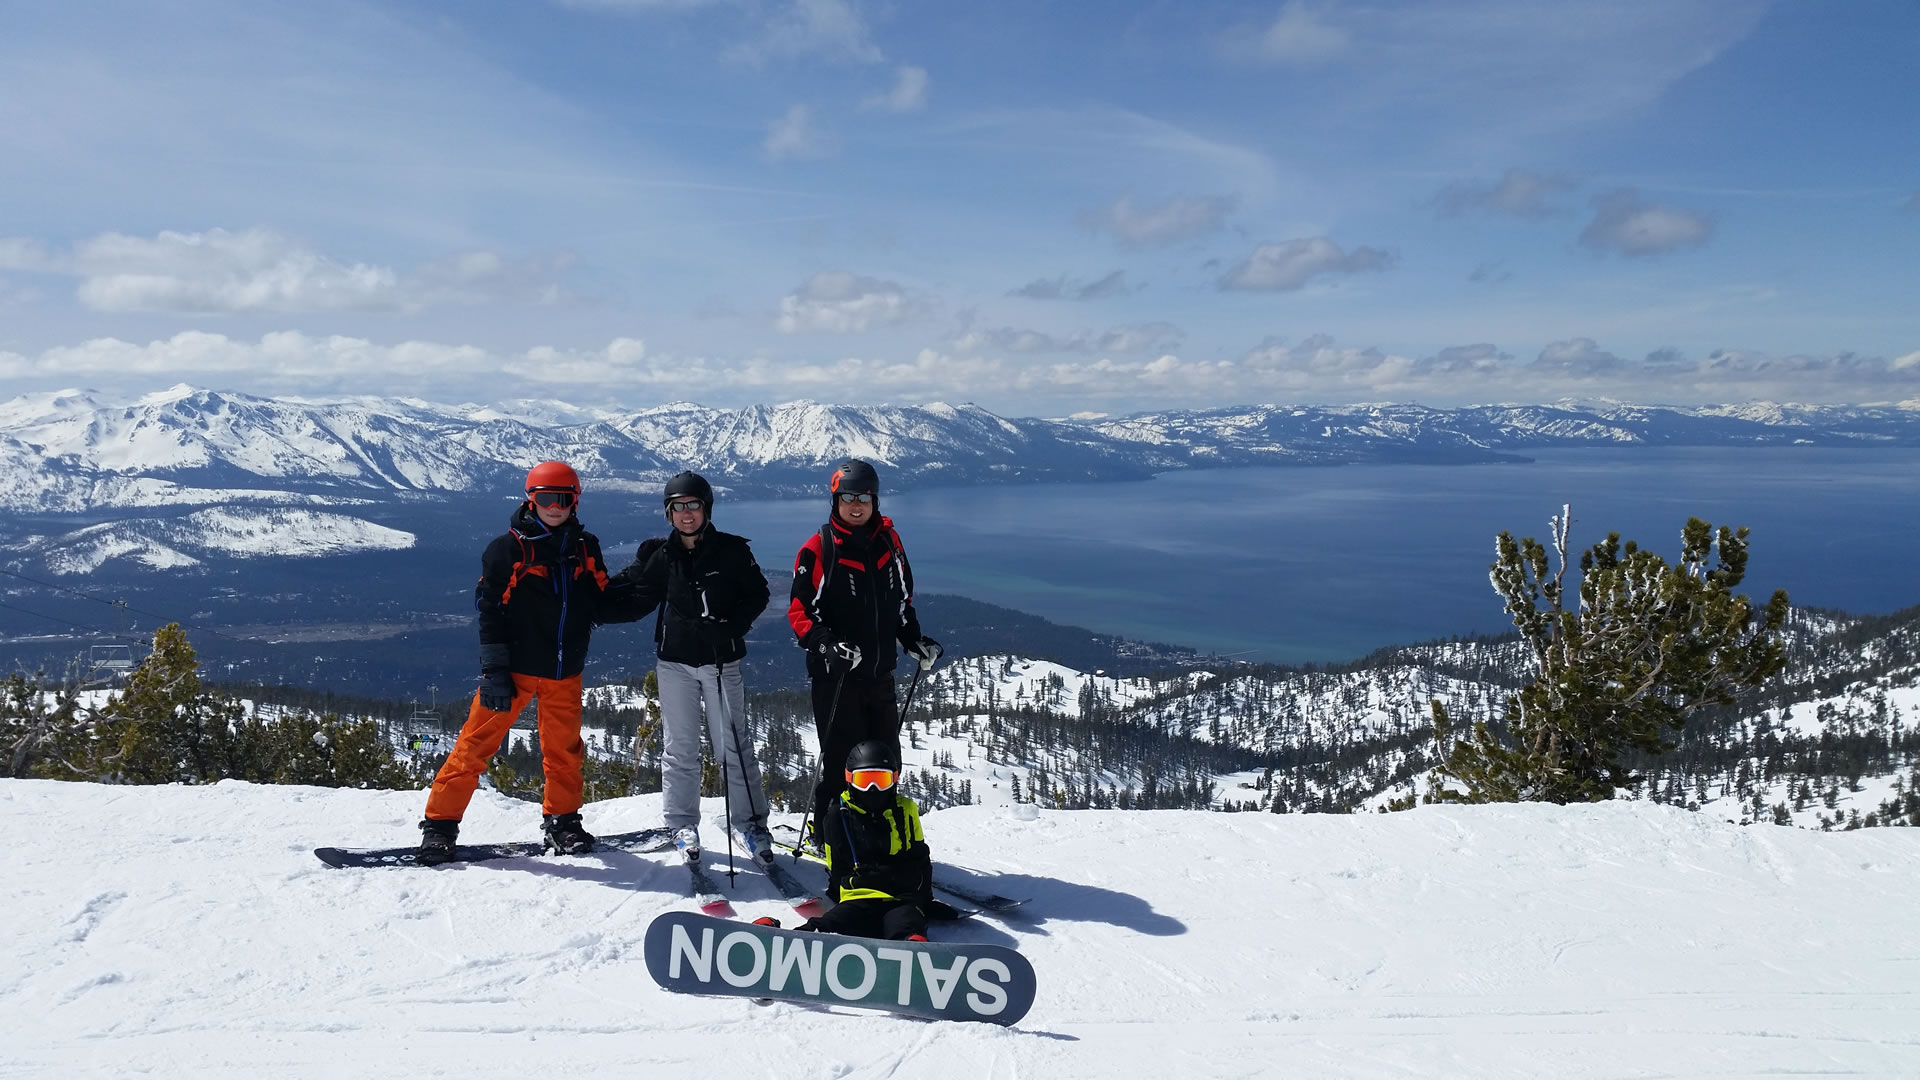 Tahoe Private Ski Lift Discount intended for how to ski tahoe cheap for Current Residence